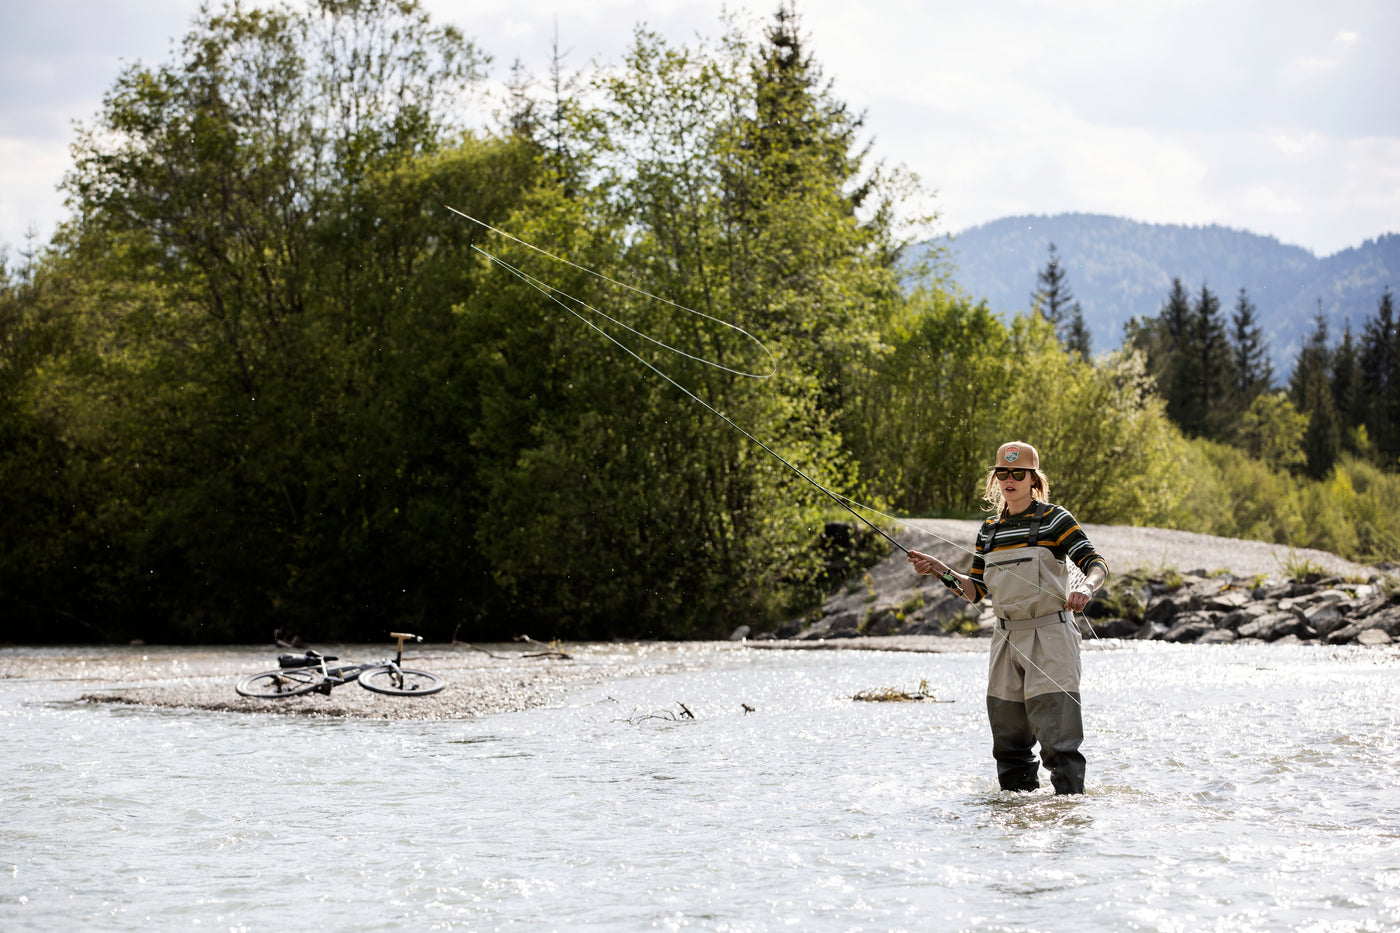 Woman fly fishing Isar River in Germany with EVOC equipped gravel bike in the background